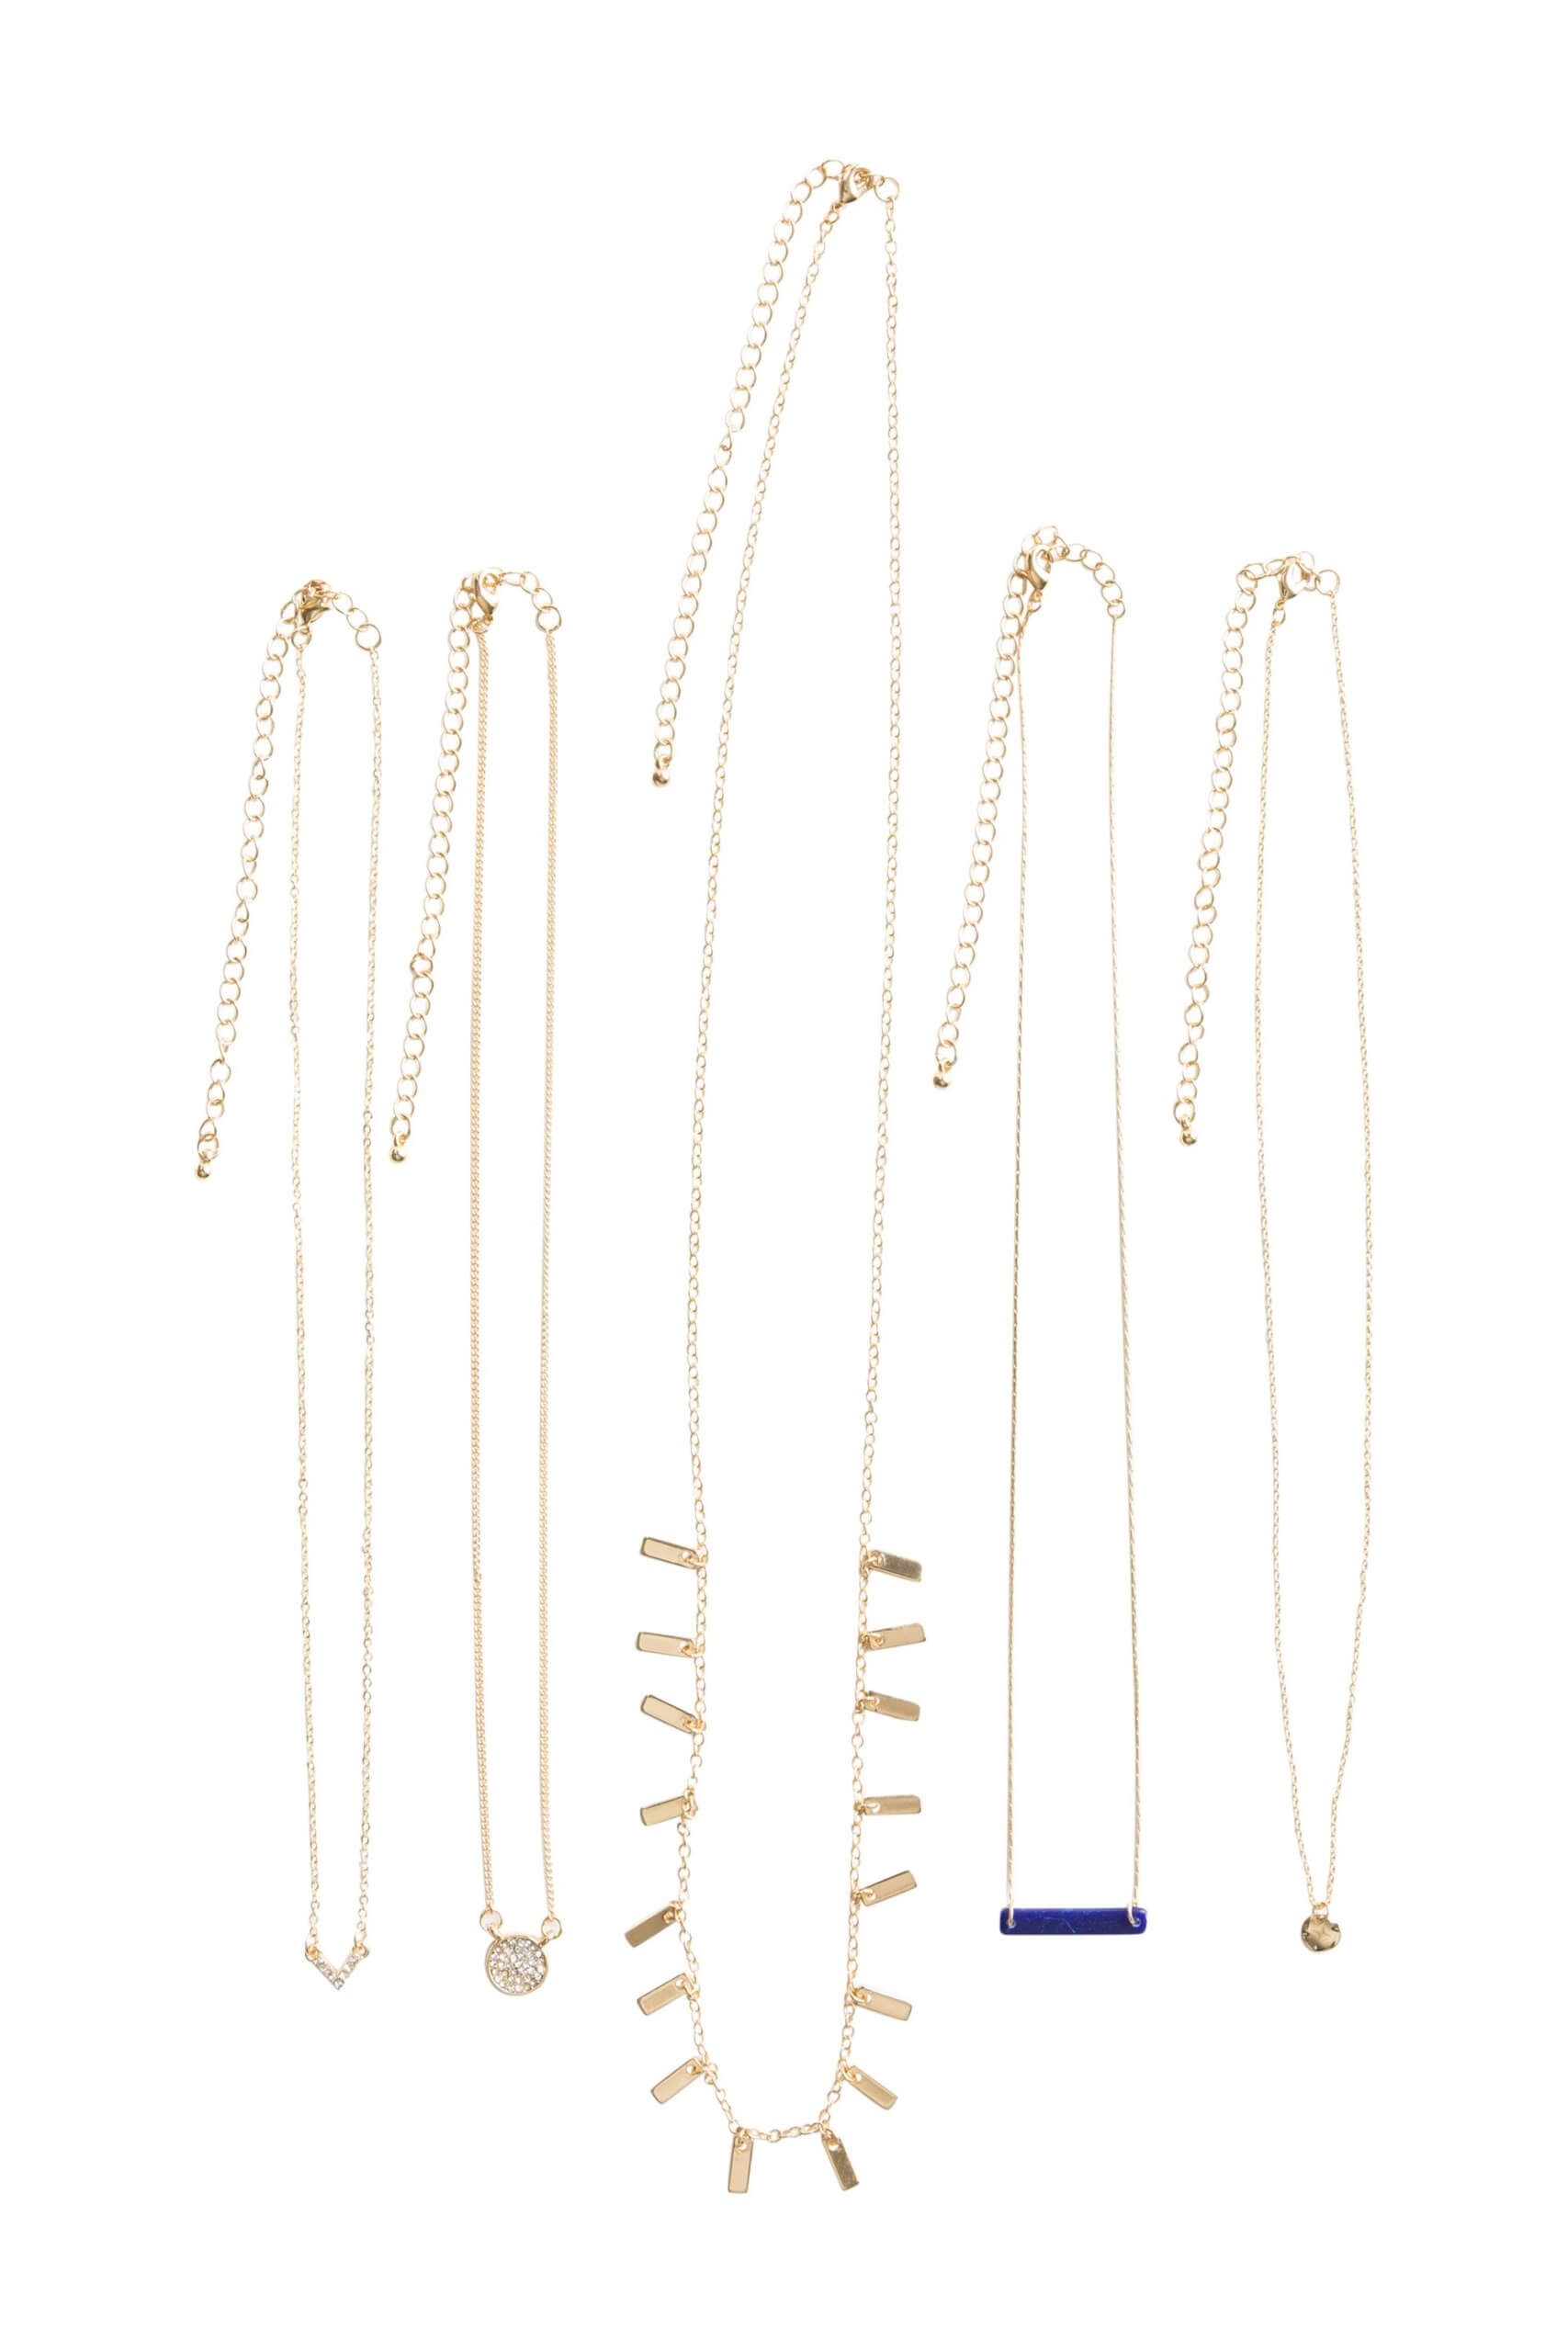 Stitch Fix Women's necklace set with five gold chains.